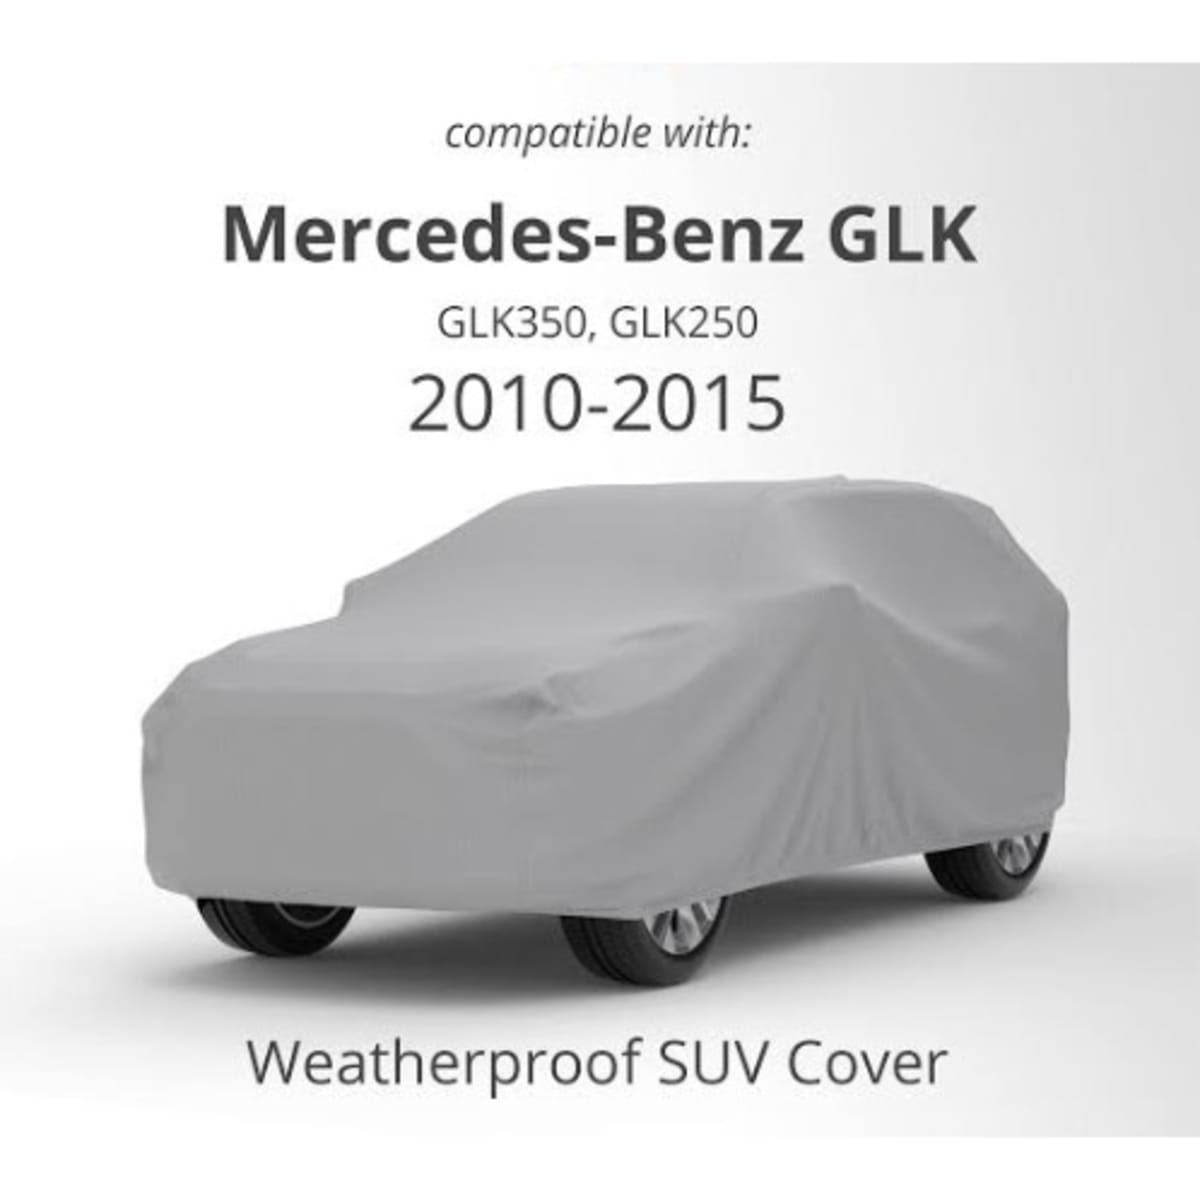 Water Resistant Car Cover For Mercedes Benz Glk 350 And Similar Suvs